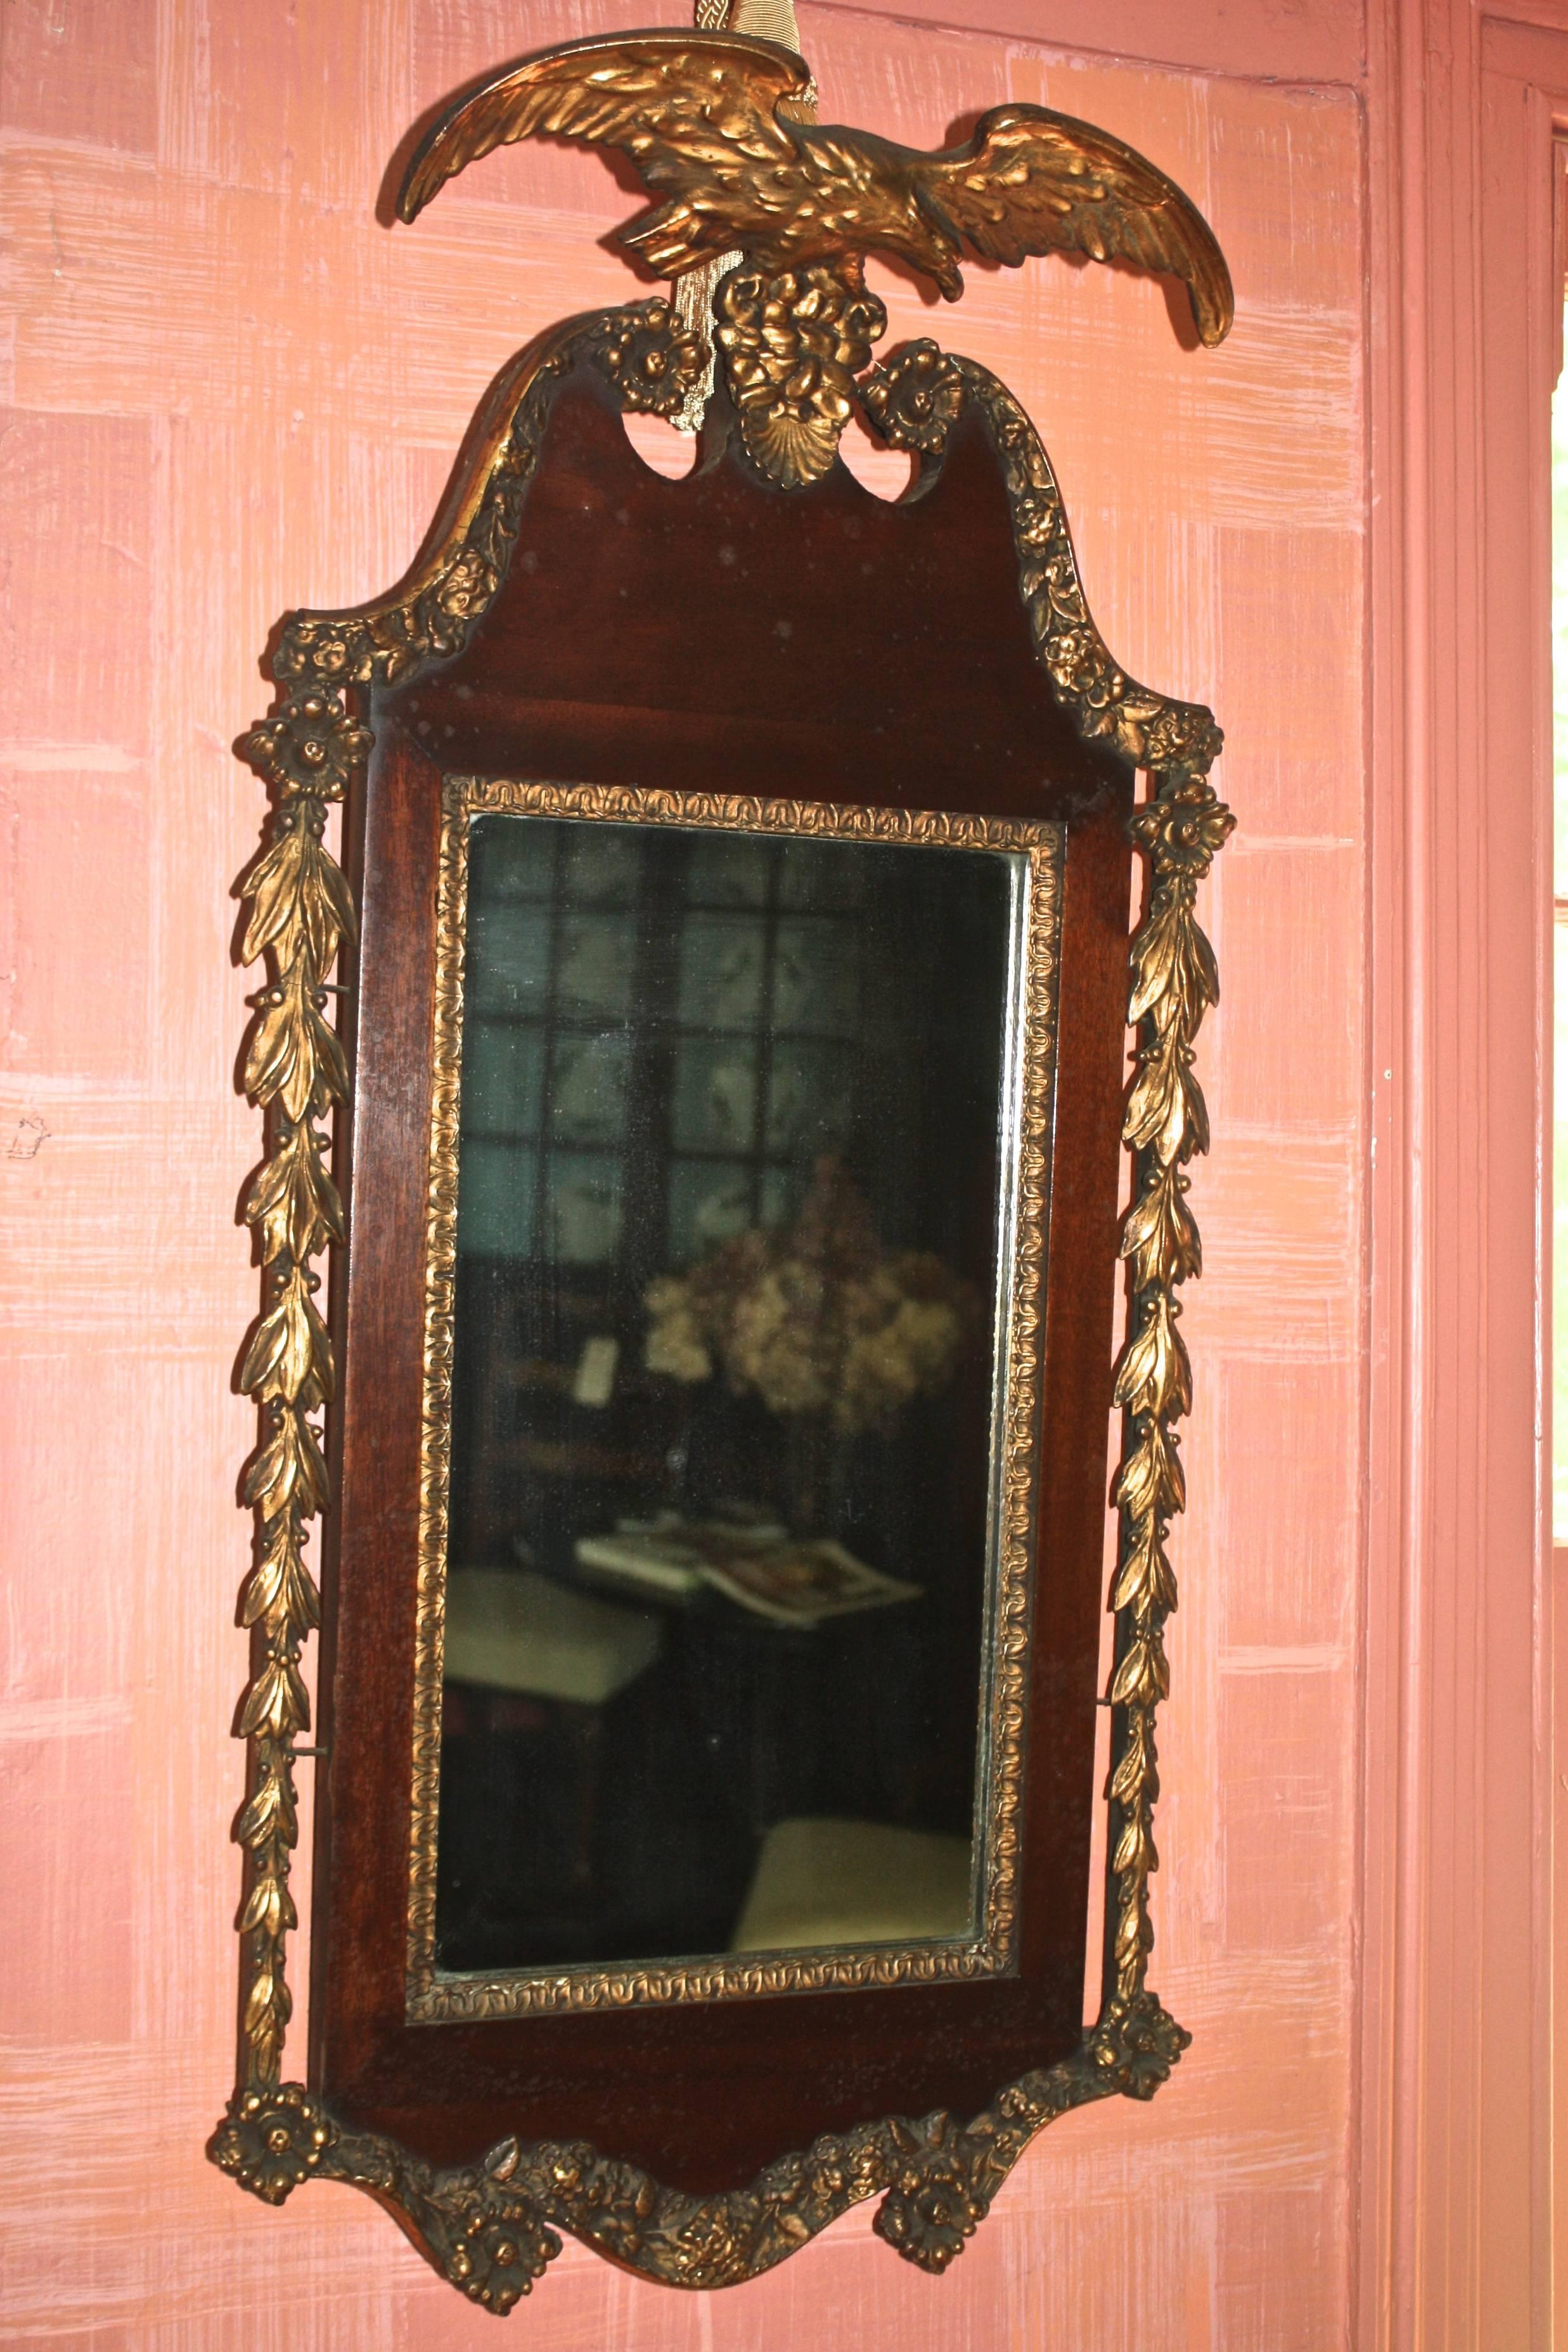 A mahogany framed and carved gilt wood adorned mirror with an eagle surmount.  The gilded eagle and especially the foliate elements, are fine, complex, and well executed.  The plate (mirror) appears to be original.  Made in the manner of American